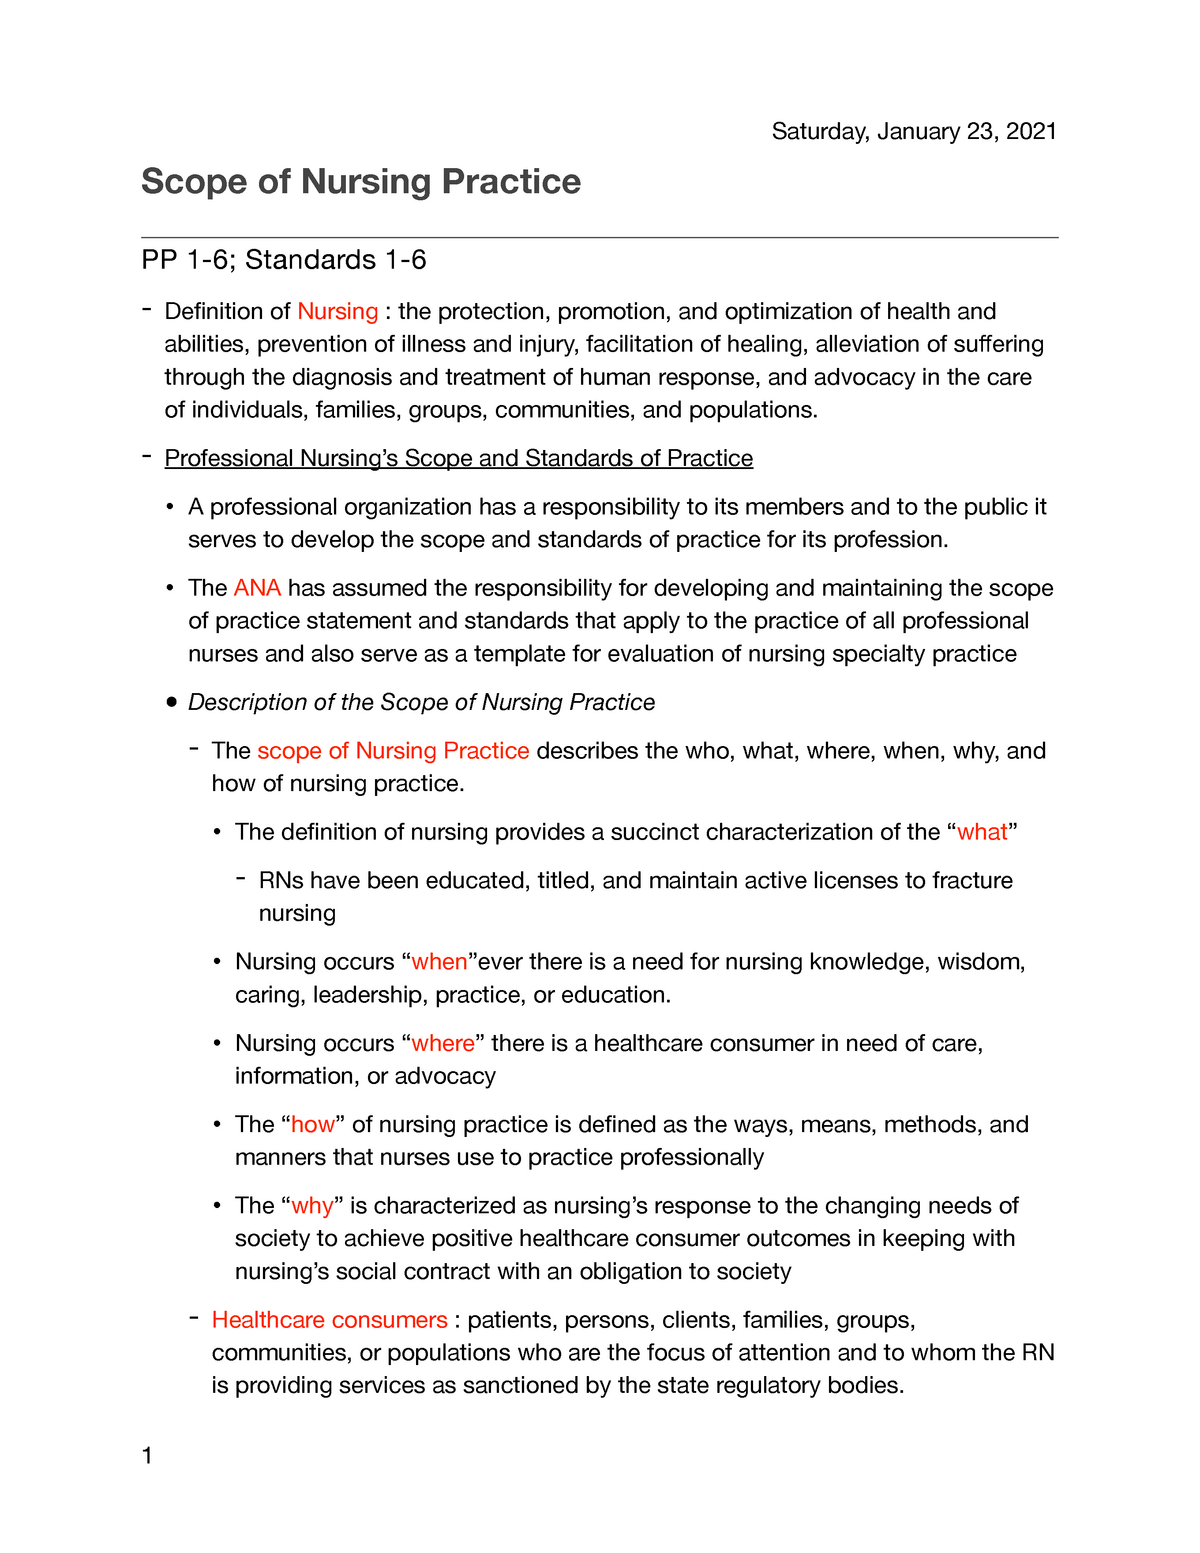 ANA PP 16 Lecture notes 1 Scope of Nursing Practice PP 16